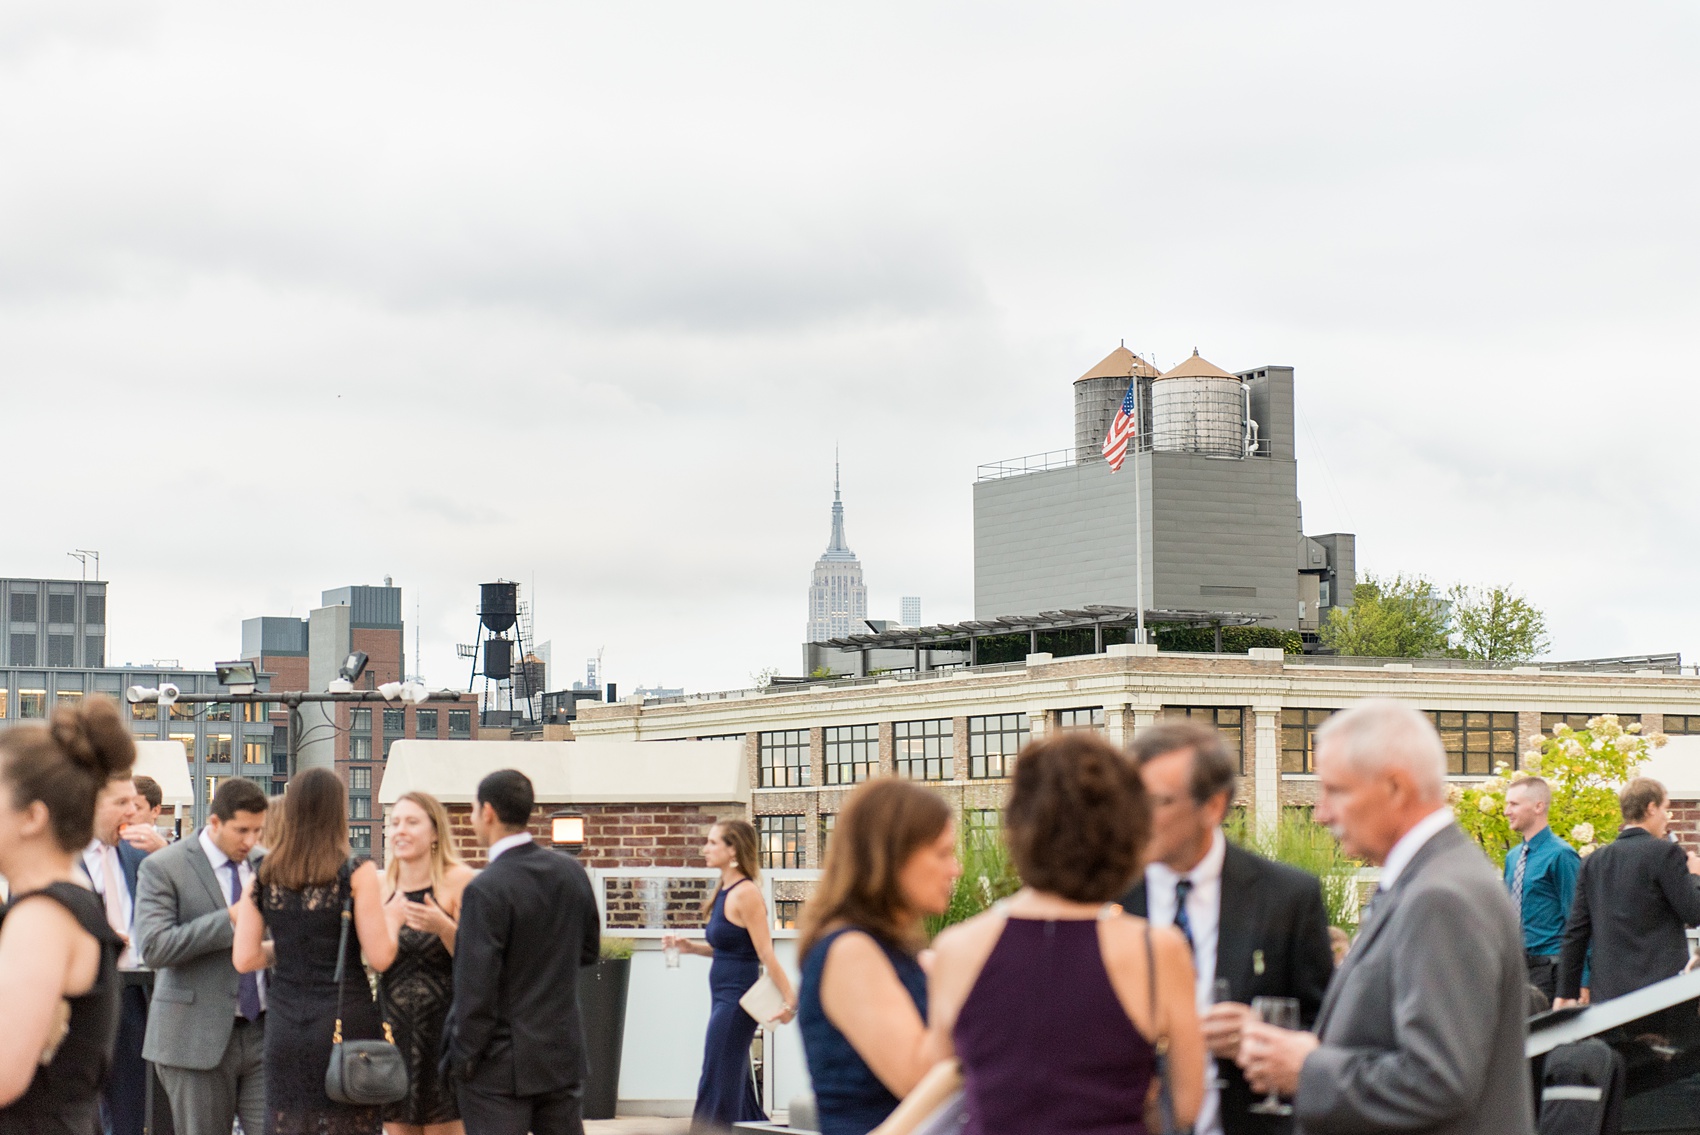 Photos of a NYC wedding venue, Tribeca Rooftop, by Mikkel Paige Photography. This ceremony and reception location has an outdoor space overlooking the Manhattan skyline. These pictures will provide inspiration in New York! The couple dreamed of getting married in this awesome city with flowers and colors of fall. Click through for more details from this beautiful celebration! #TribecaRooftop #NYCVenues #MikkelPaige #NYCwedding #NYCskyline #NYCWeddingPhotos #NYCWeddingPhotography #cocktailhour